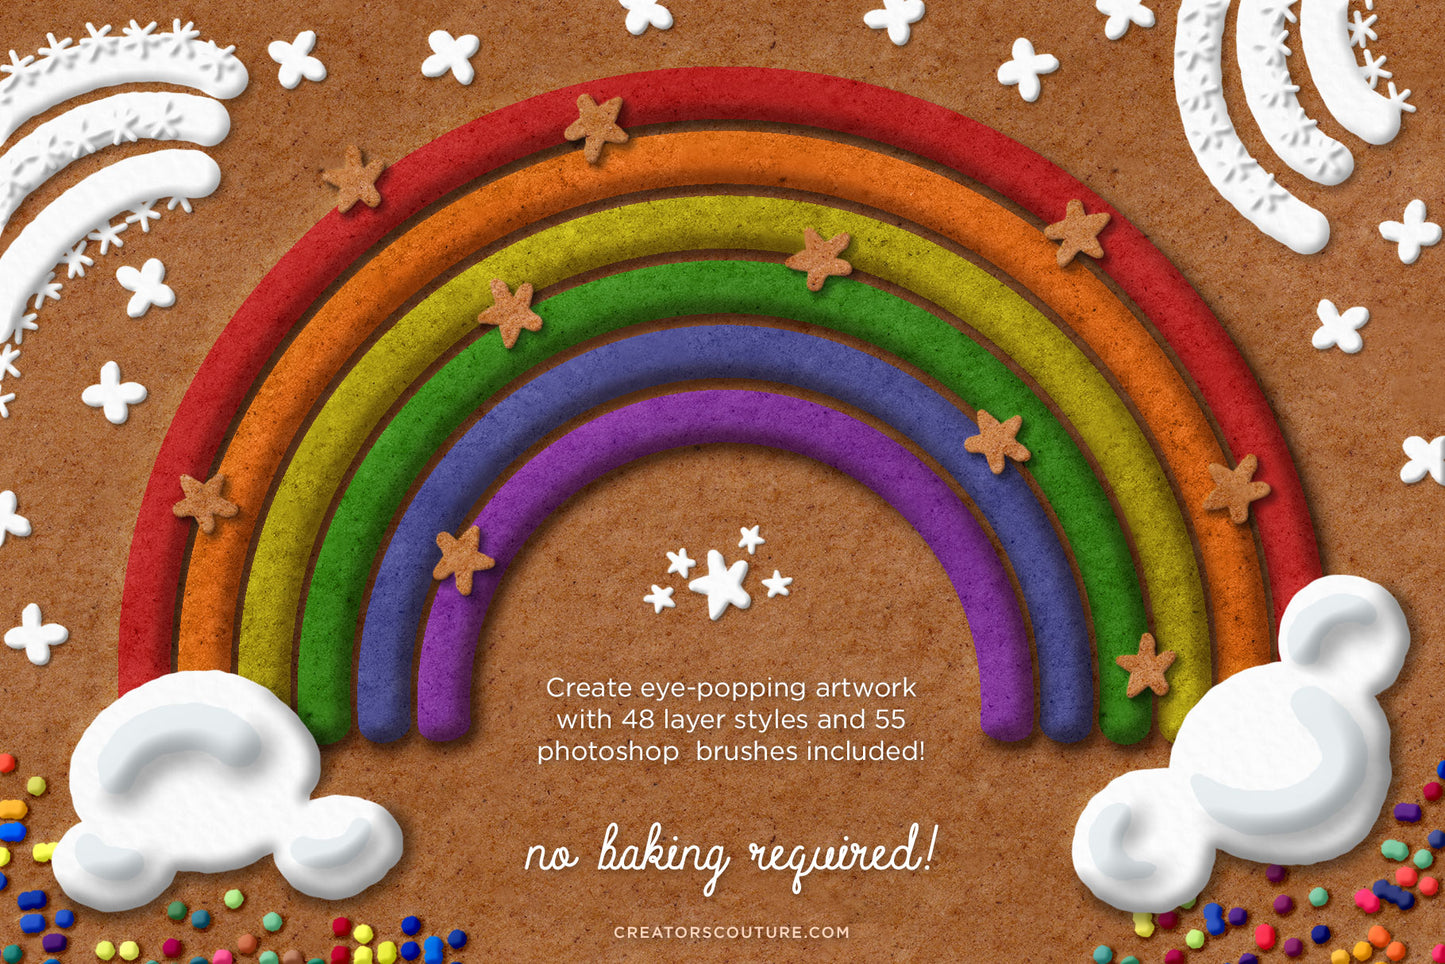 Gingerbread, Cookie, & Cake Graphic & Lettering Effects for Photoshop, cookie rainbow with icing and sprinkles